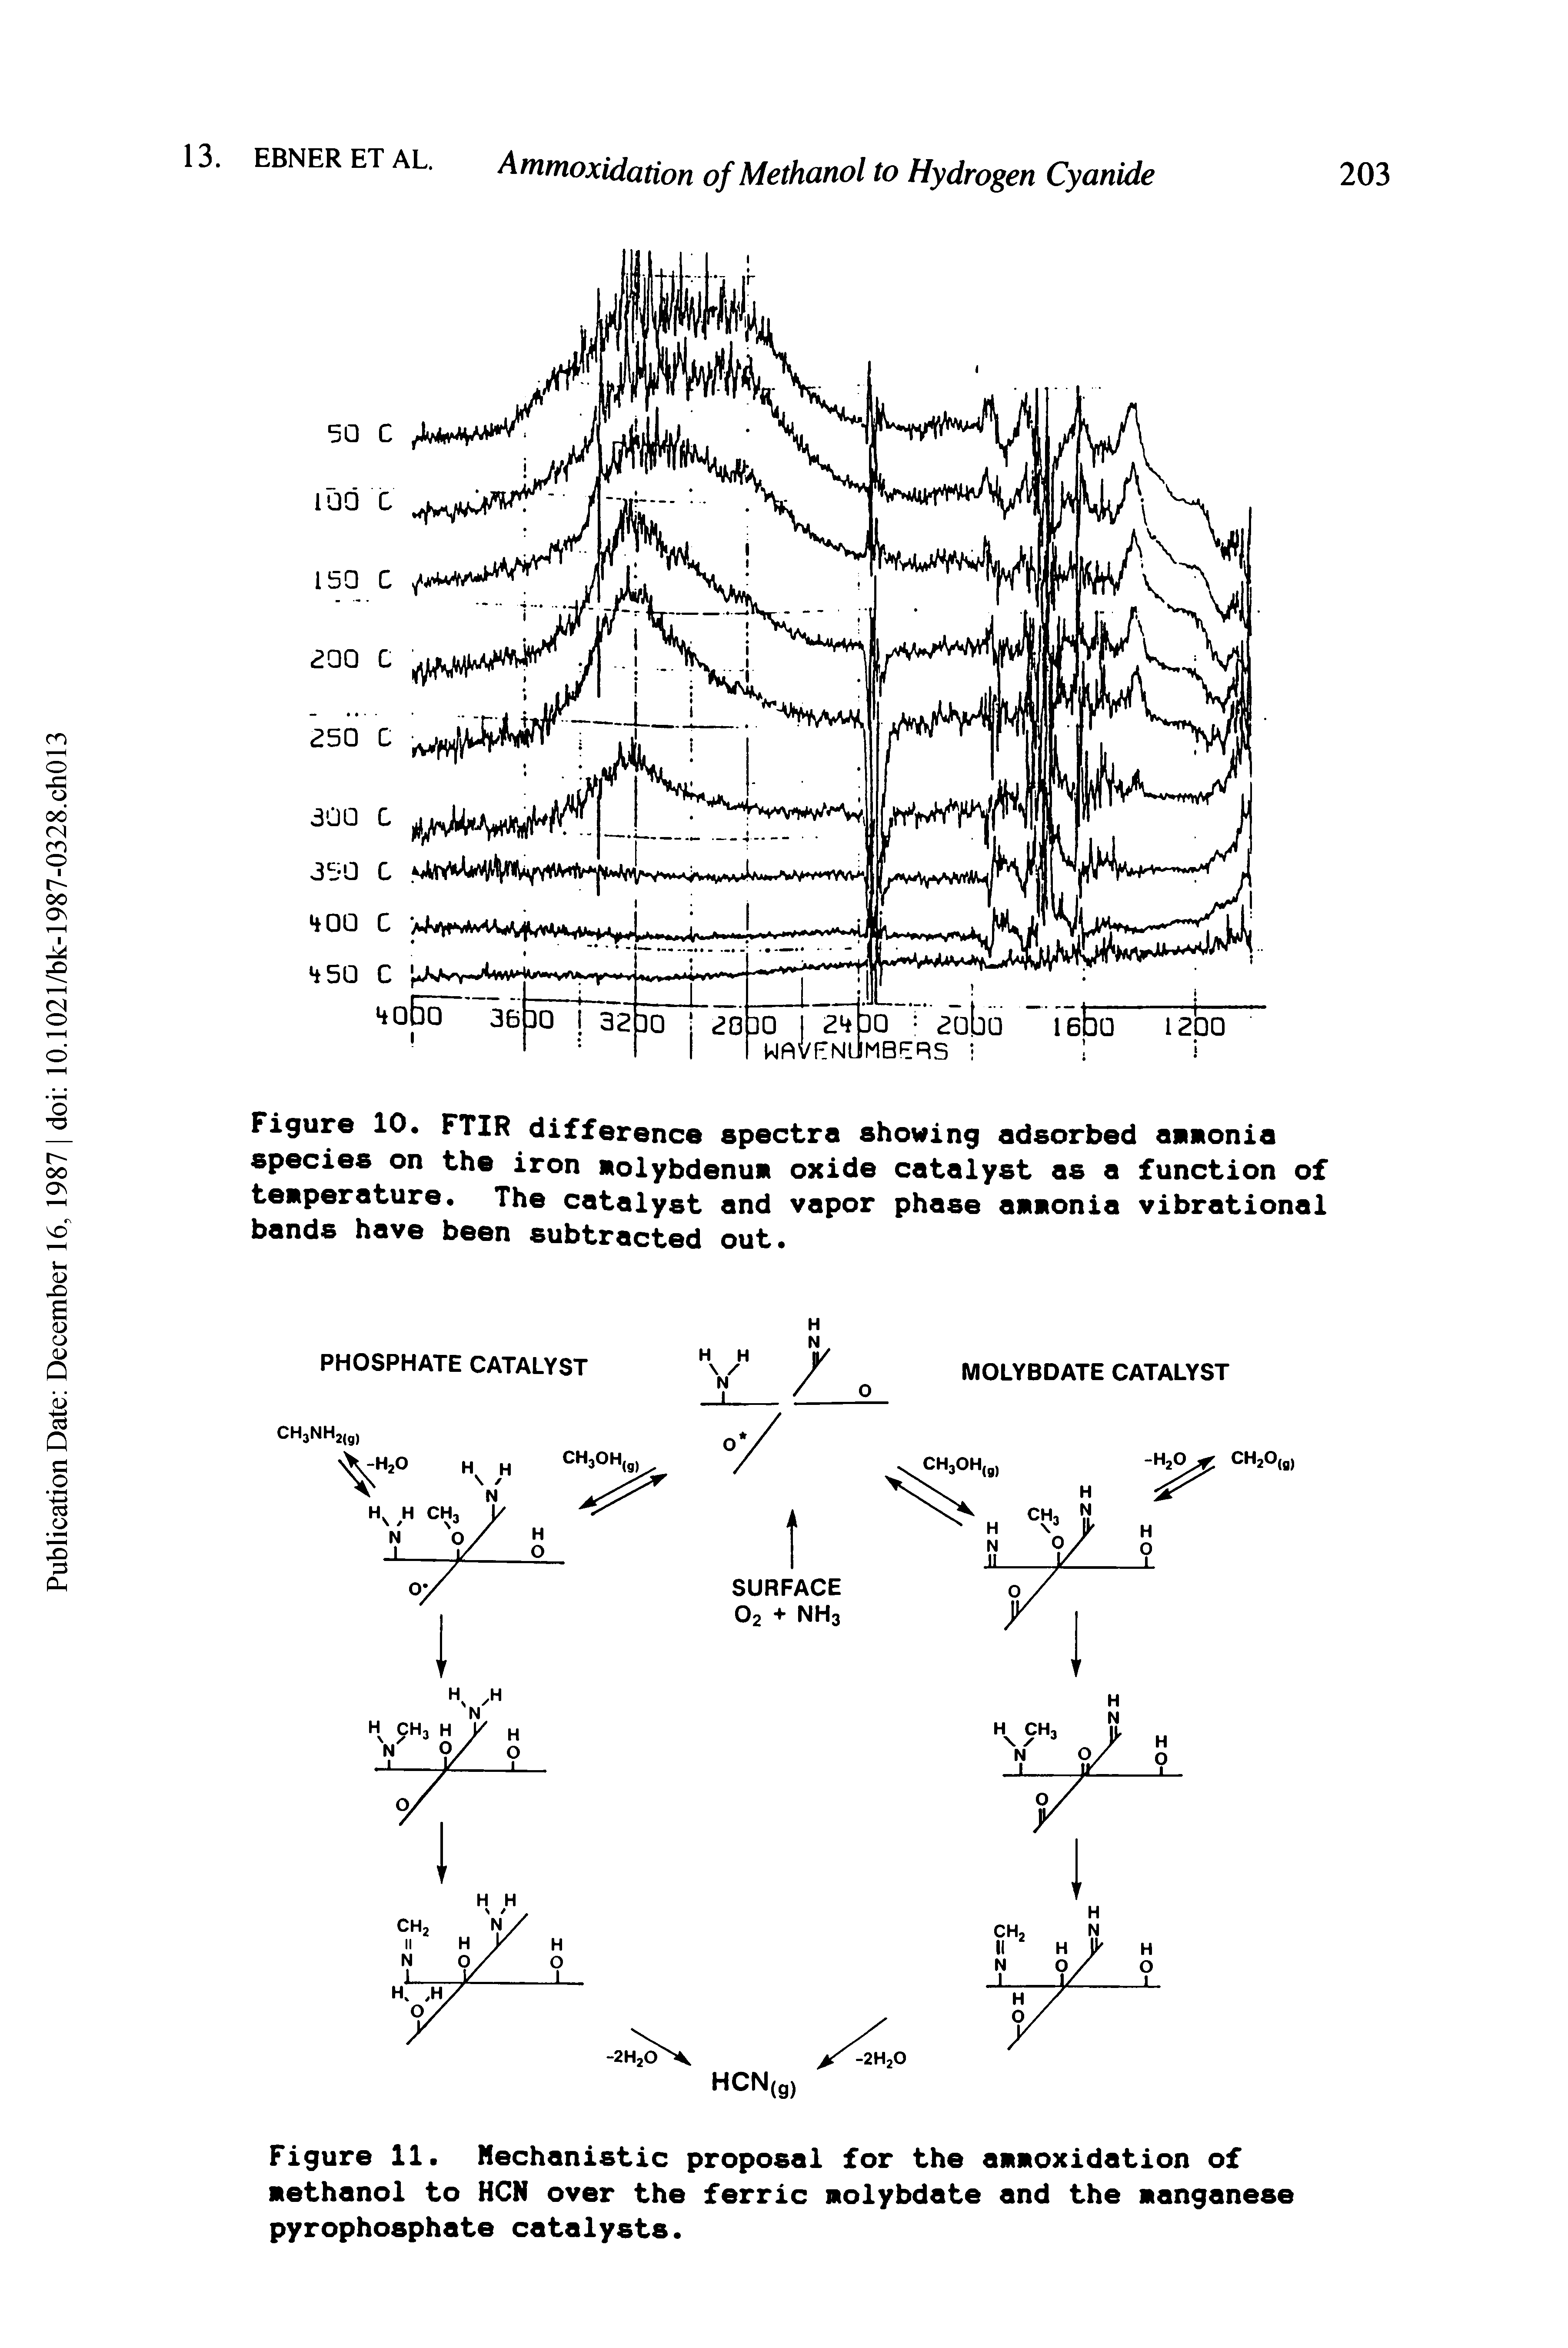 Figure 11. Mechanistic proposal for the aamoxidation of methanol to HCN over the ferric molybdate and the manganese pyrophosphate catalysts.